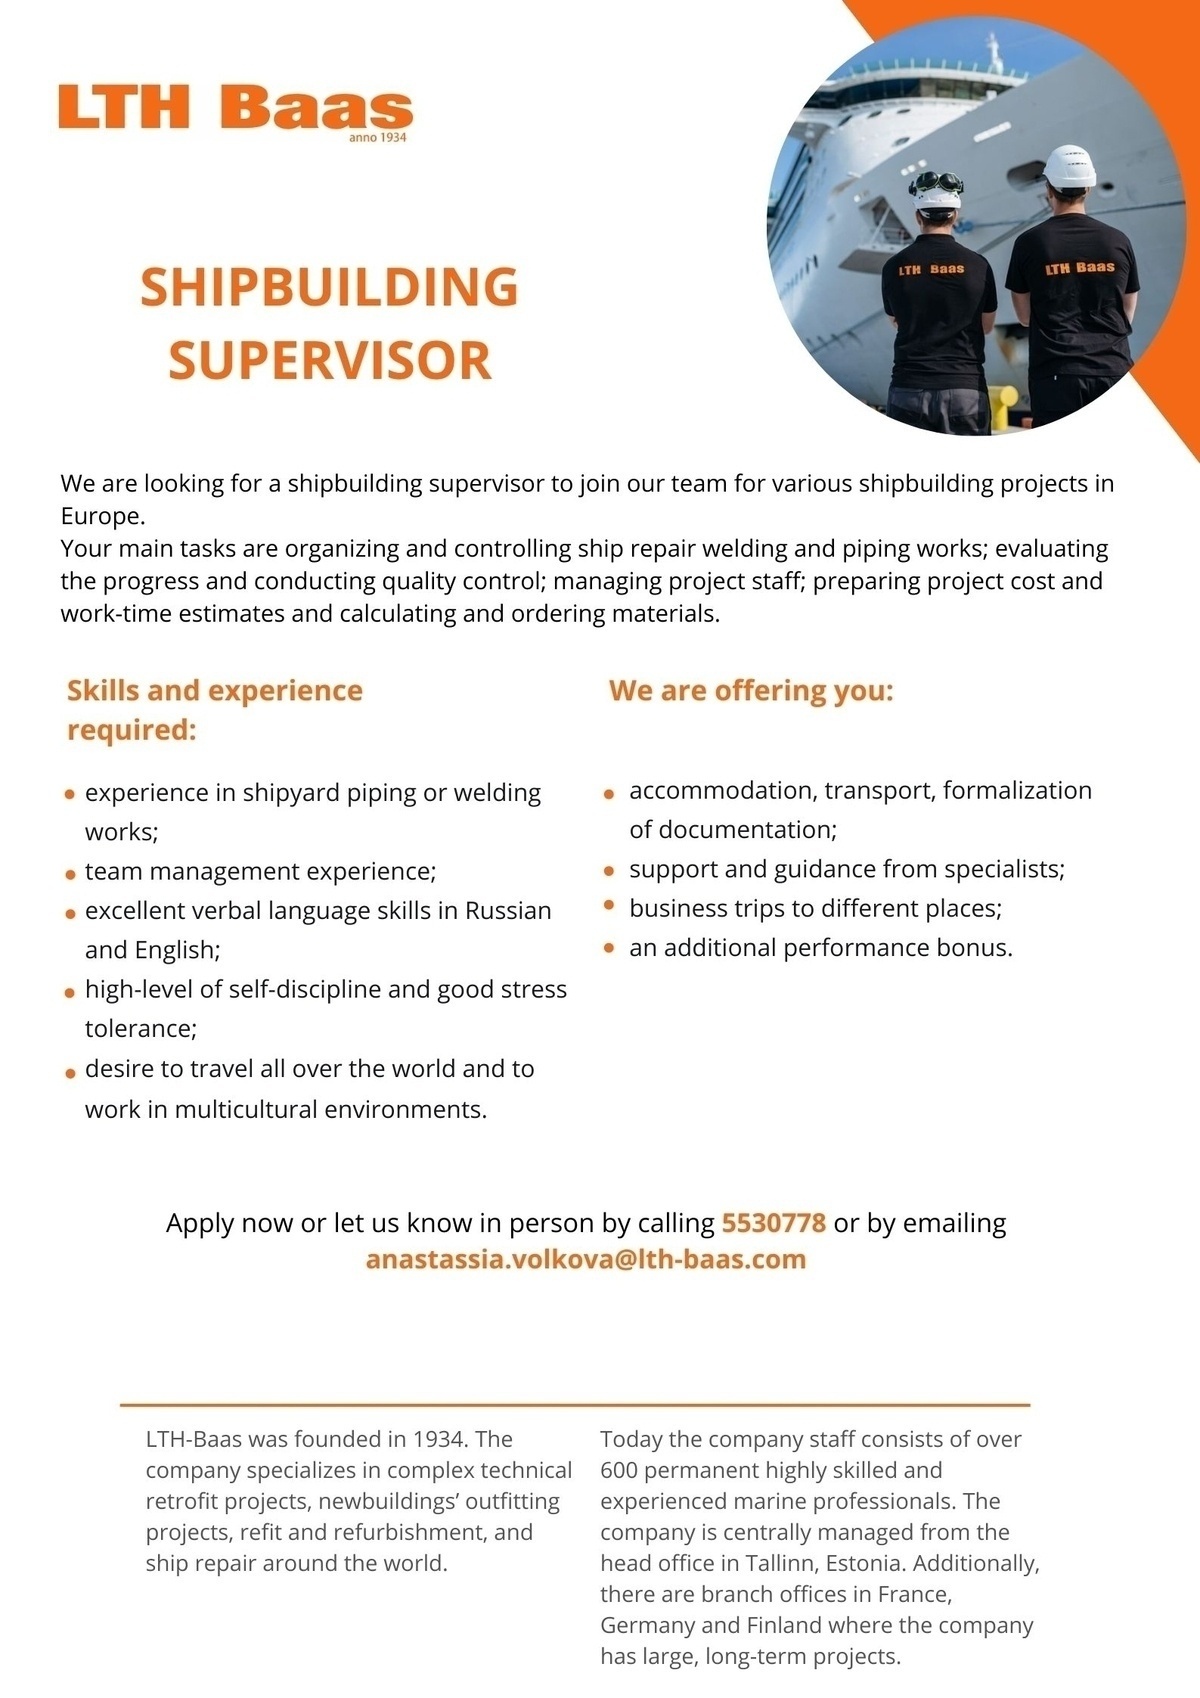 LTH-Baas AS SHIPBUILDING SUPERVISOR (PIPING, WELDING, STEEL WORKS)